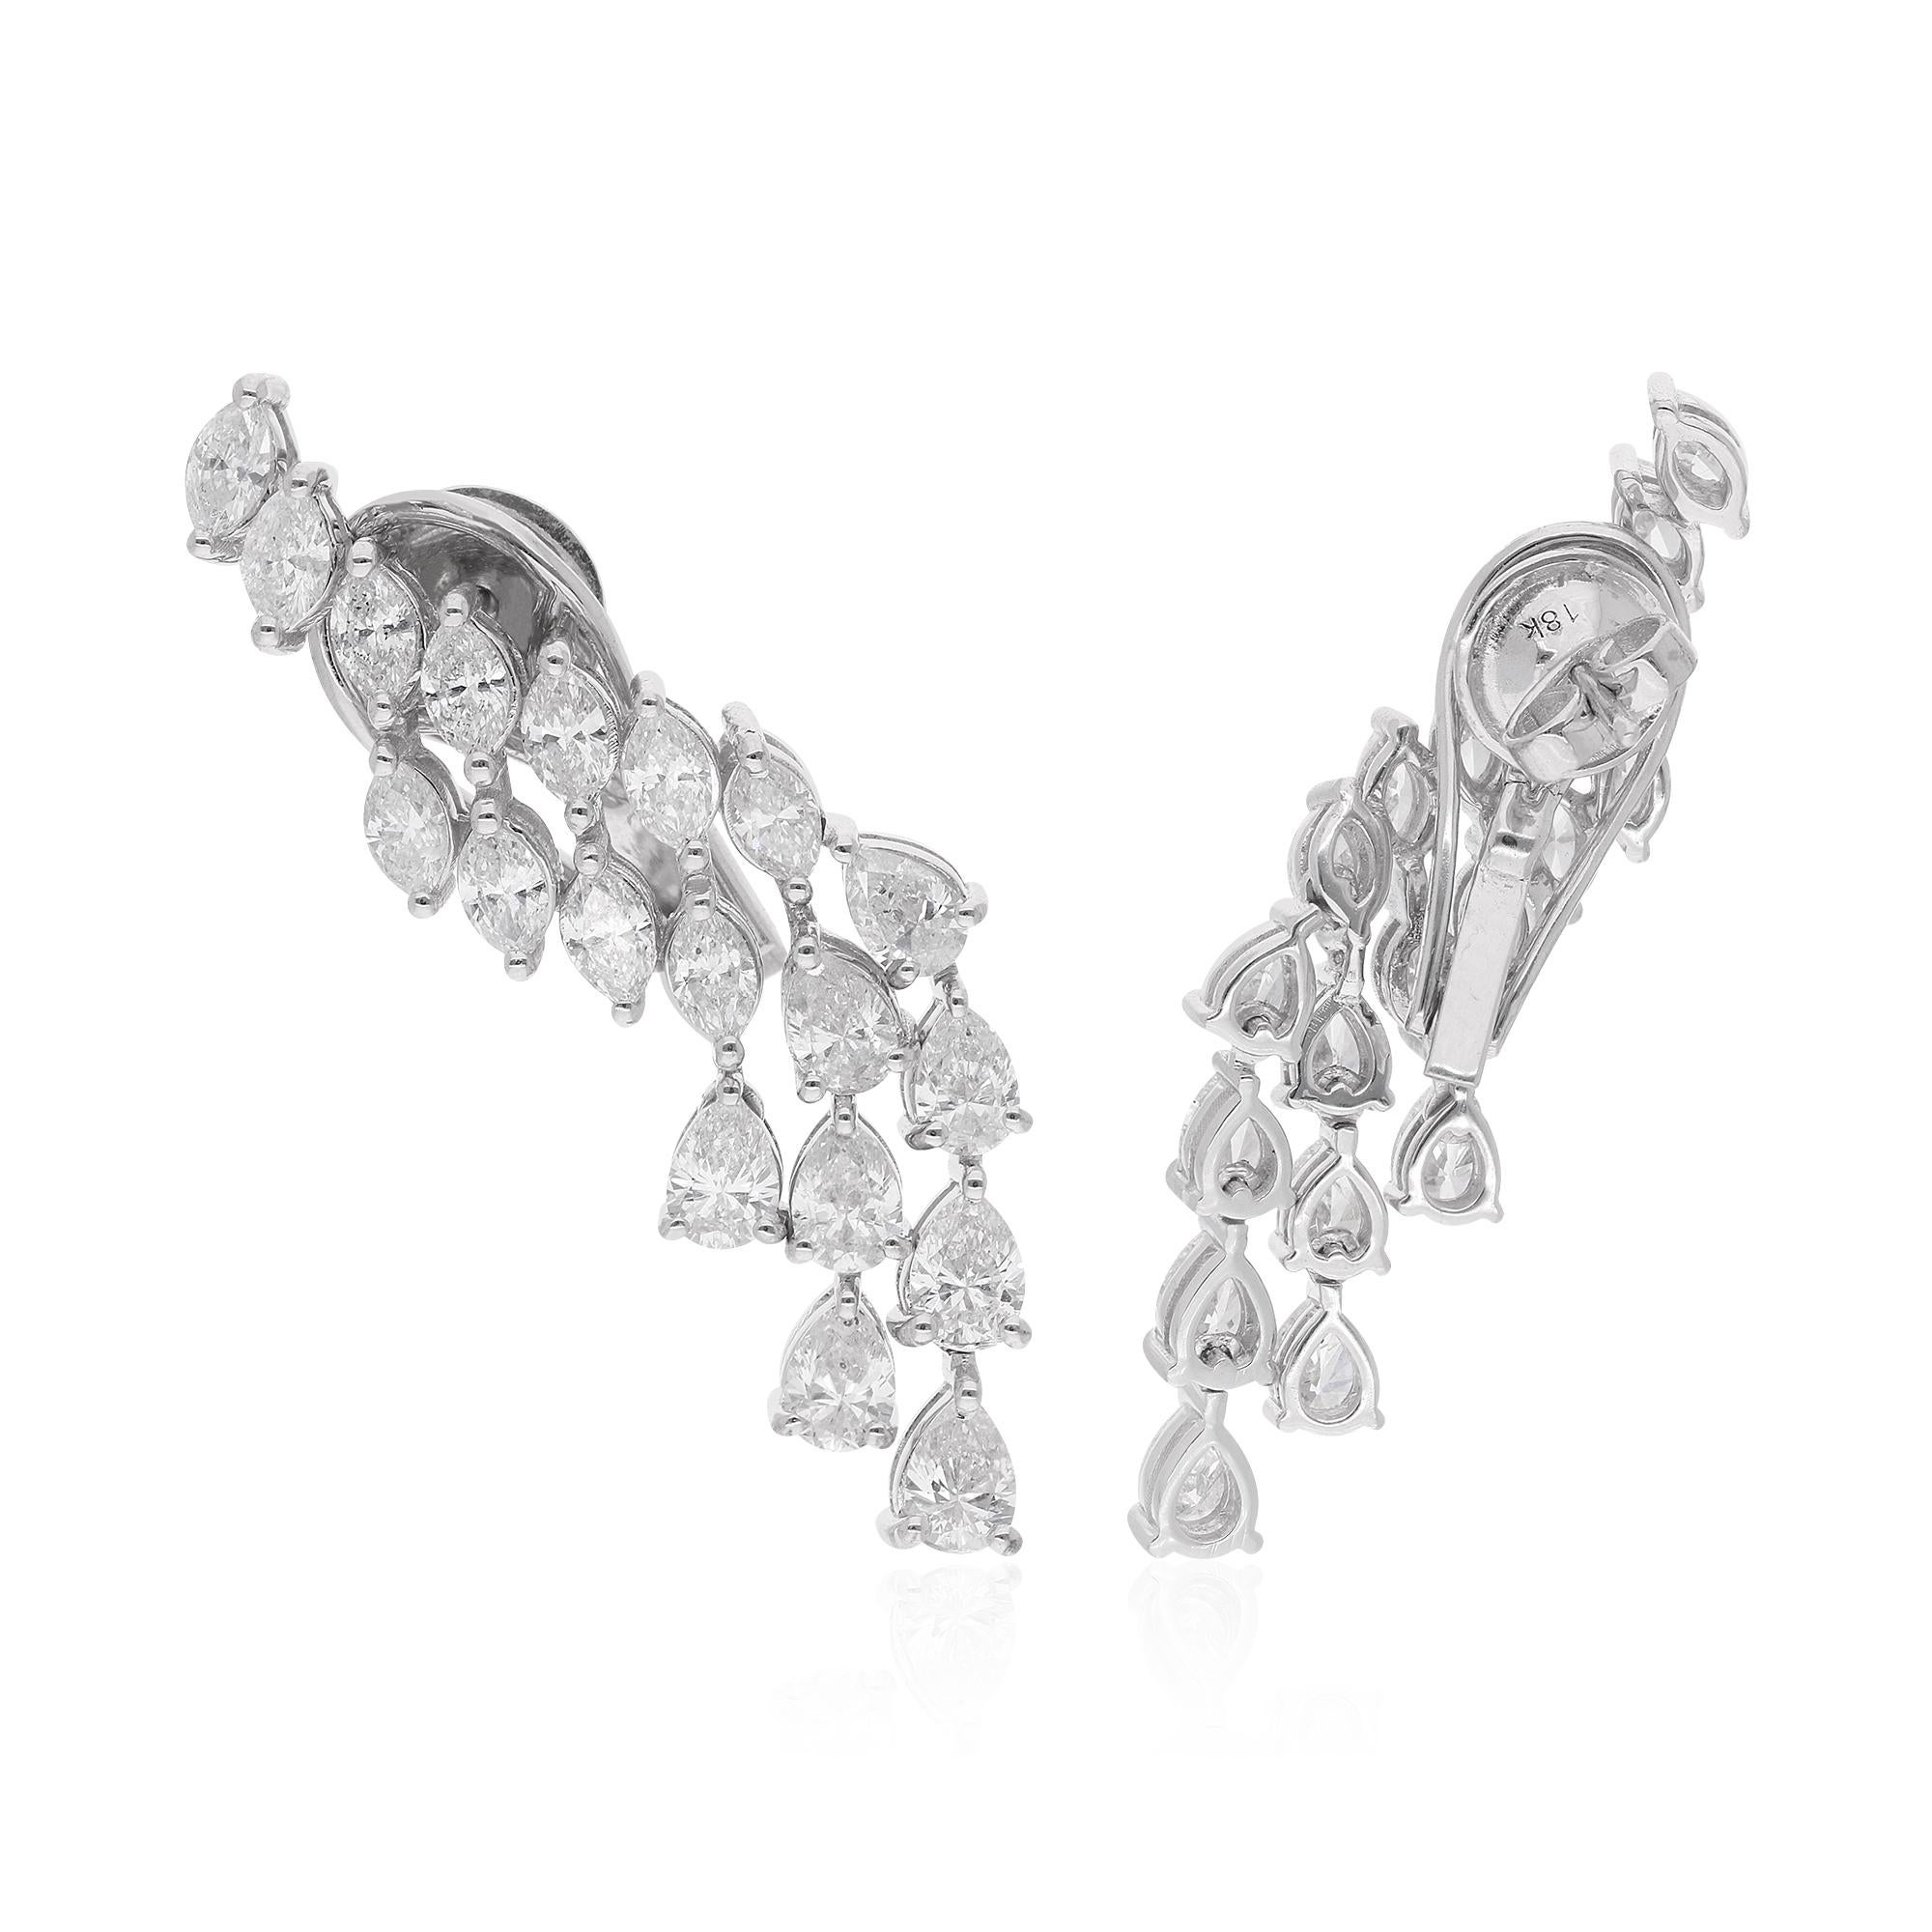 Set in 14 Karat White Gold, these earrings exude a luxurious and sophisticated appeal. The pristine white gold setting serves as the perfect backdrop for the dazzling diamonds, allowing their brilliance to take center stage.

Item Code :- SEE-13669E